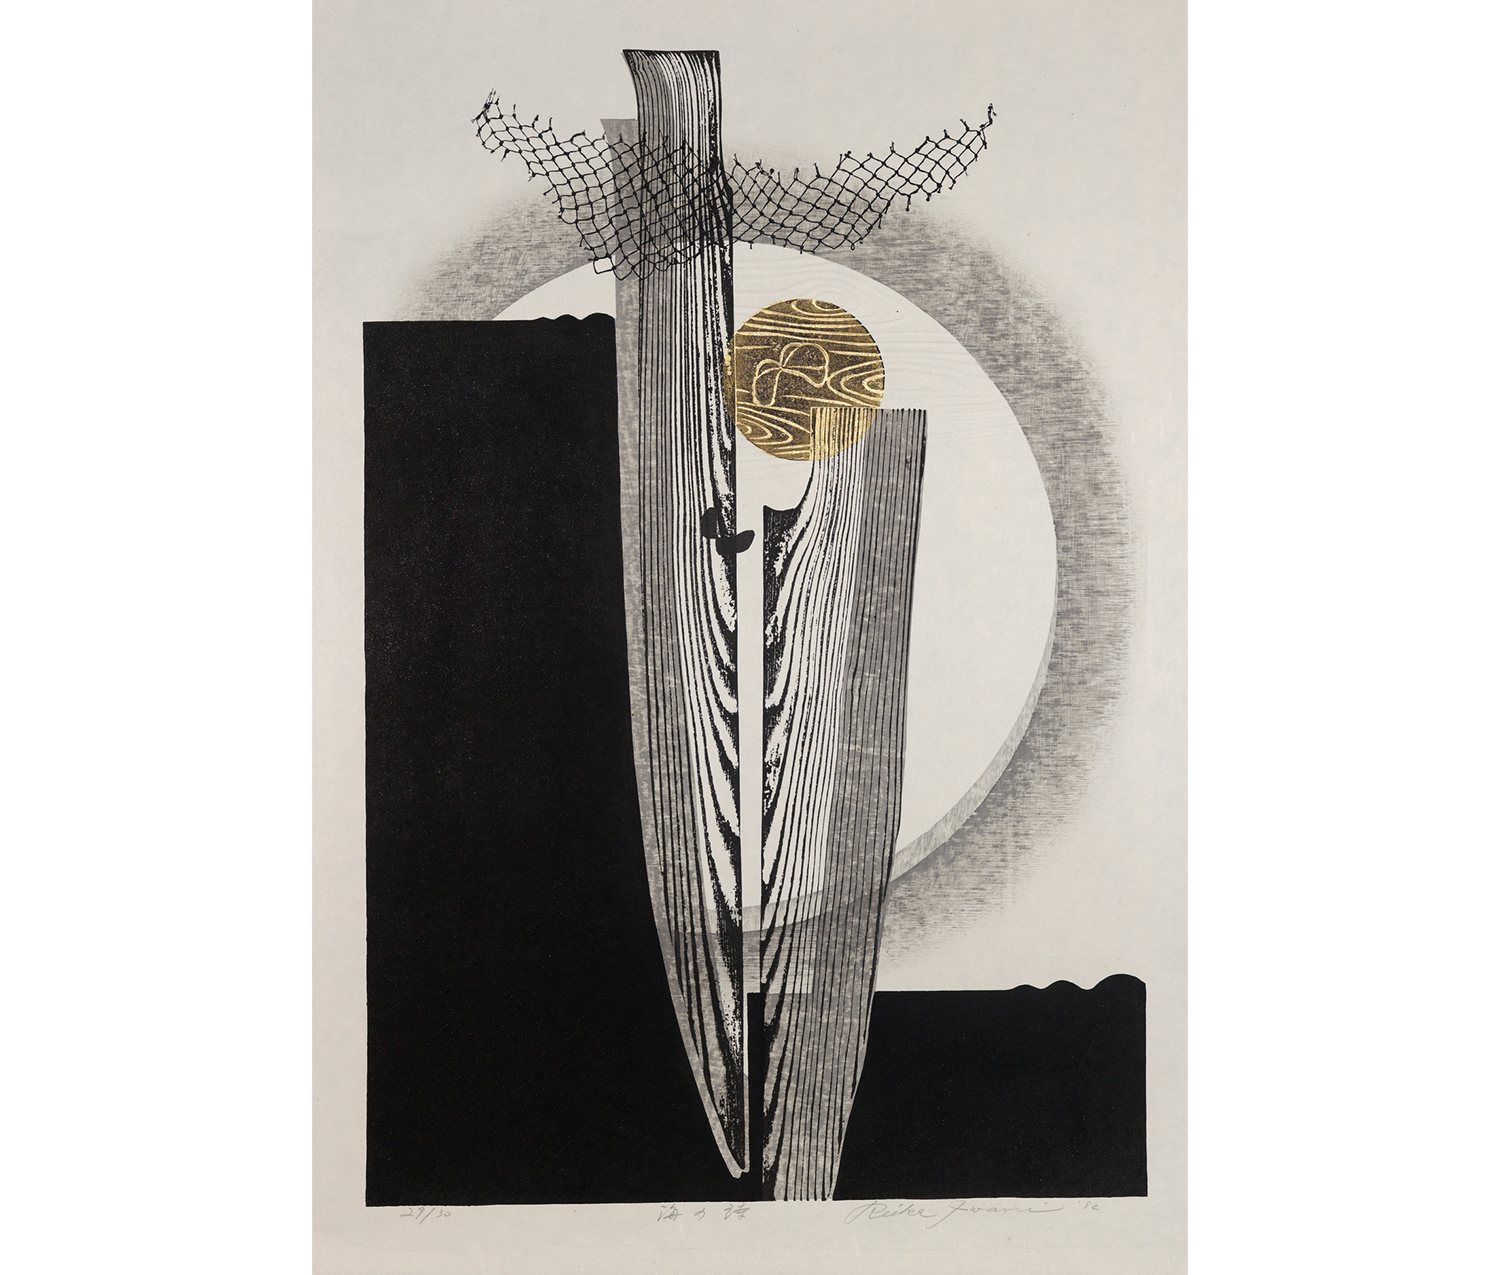 abstract, black L shape pierced with a dagger or feather-like wood-grain shape, and a gold moon above, with part of a hazy white circle and netting floating through top of feather-shape